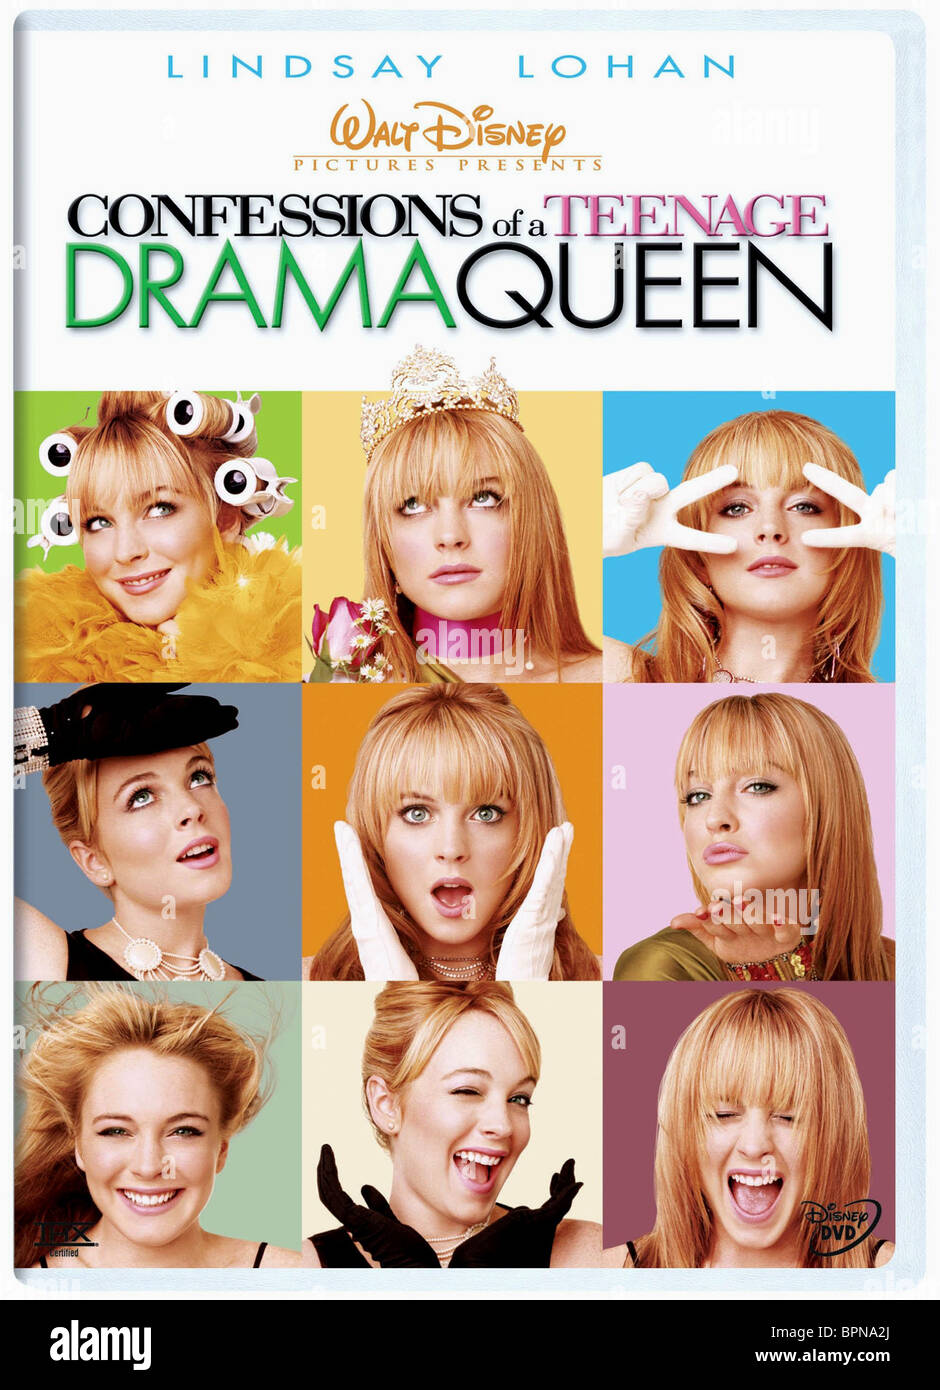 Image result for confessions of a teenage drama queen poster